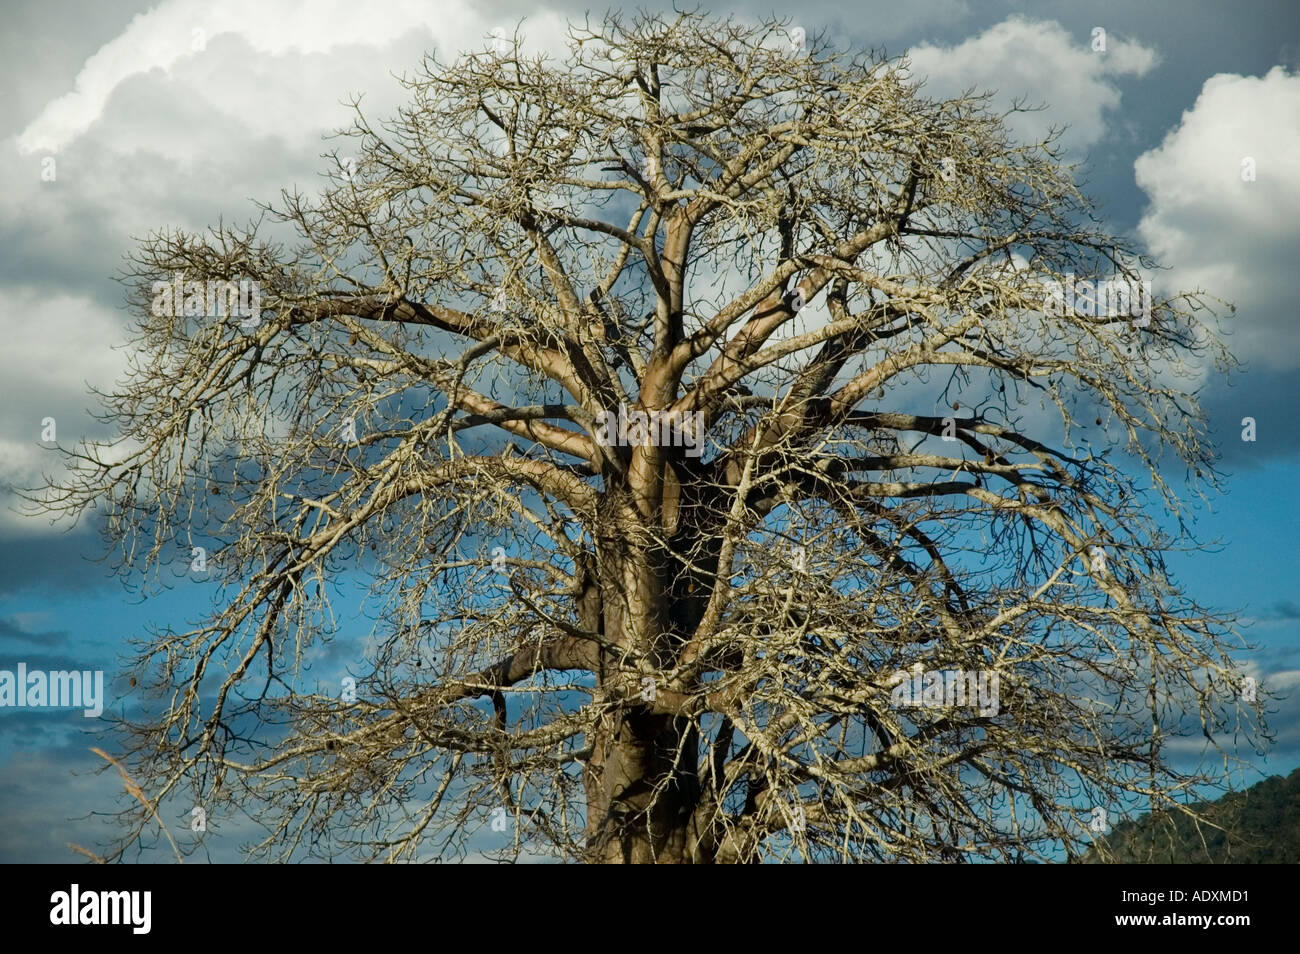 Baobab tree in northern Mozambique Stock Photo